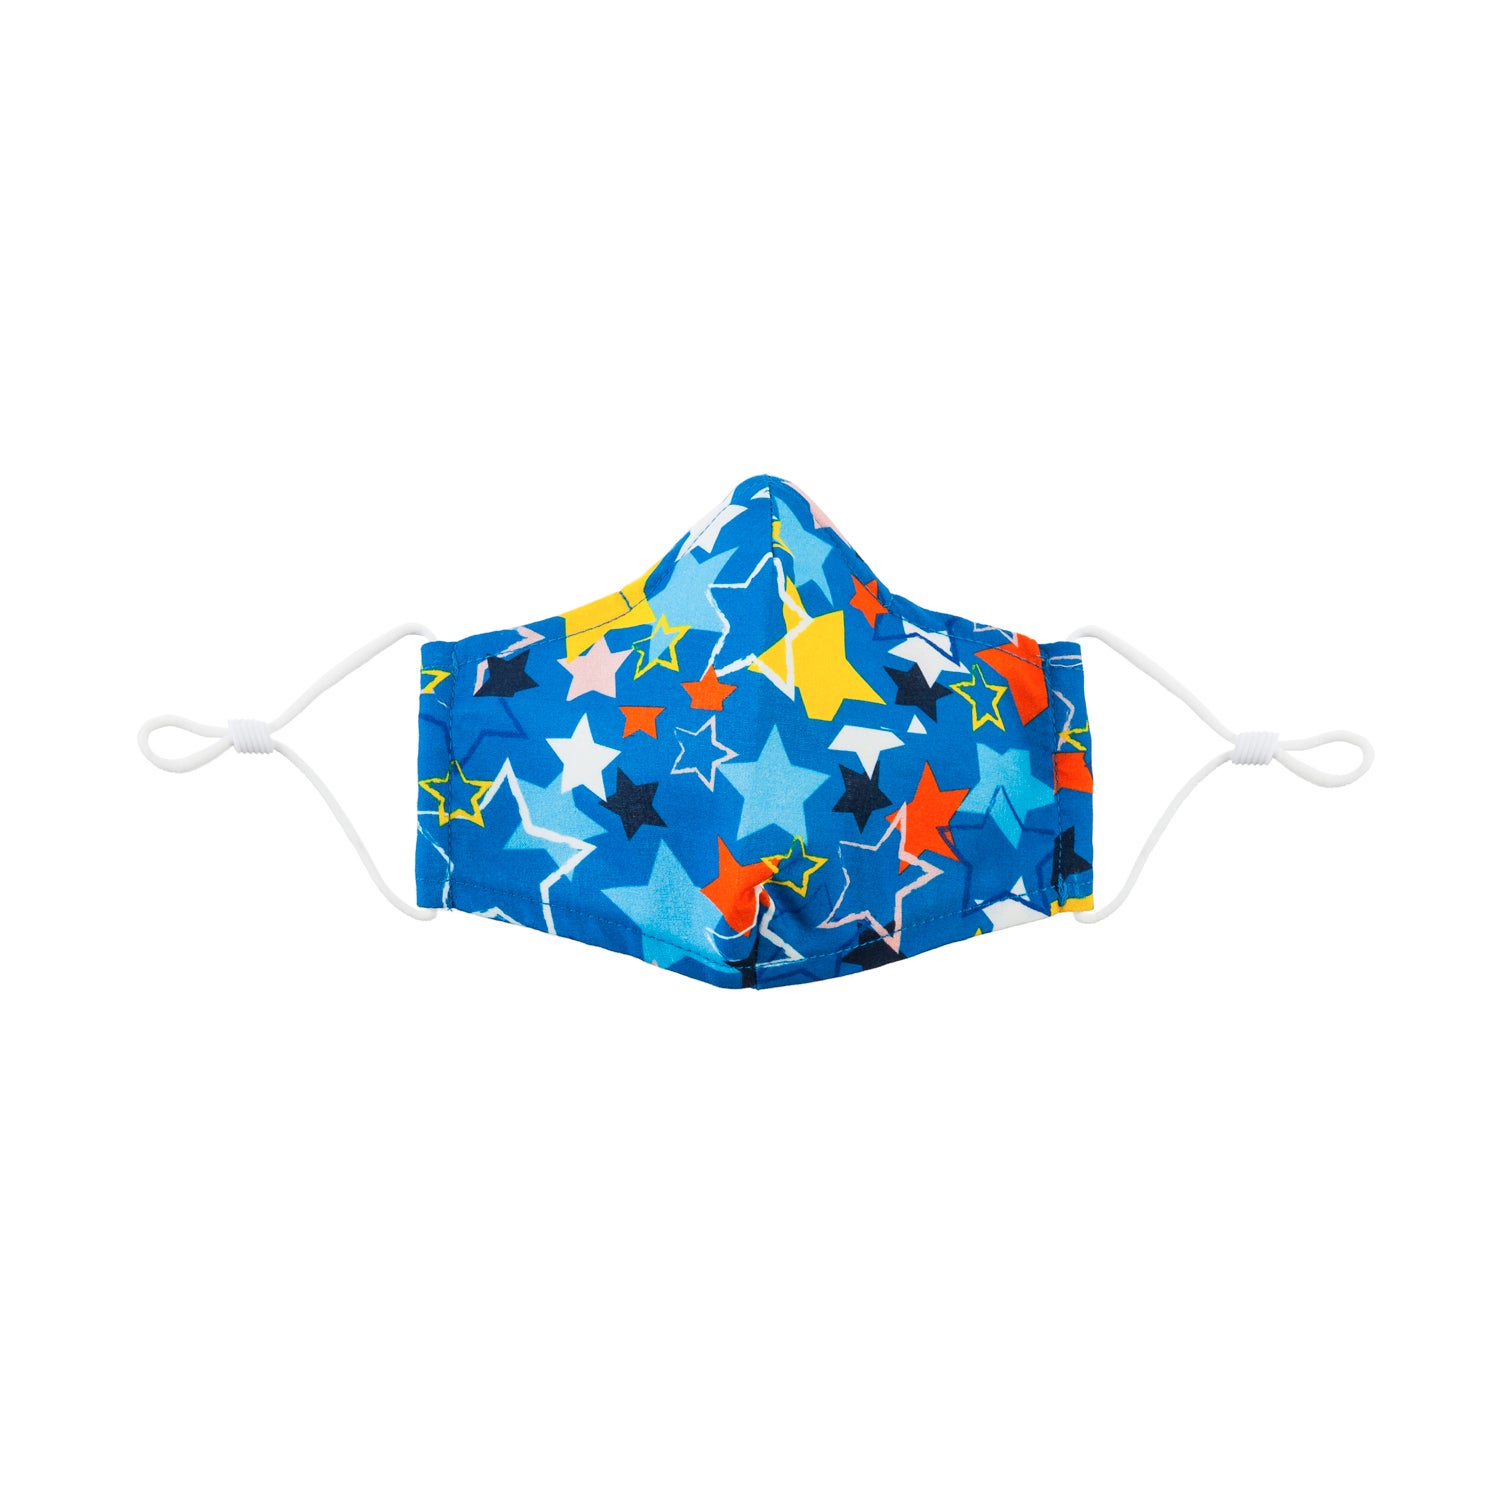 Children's Non-Medical Cotton Face Mask Set of 2 with Star Pattern